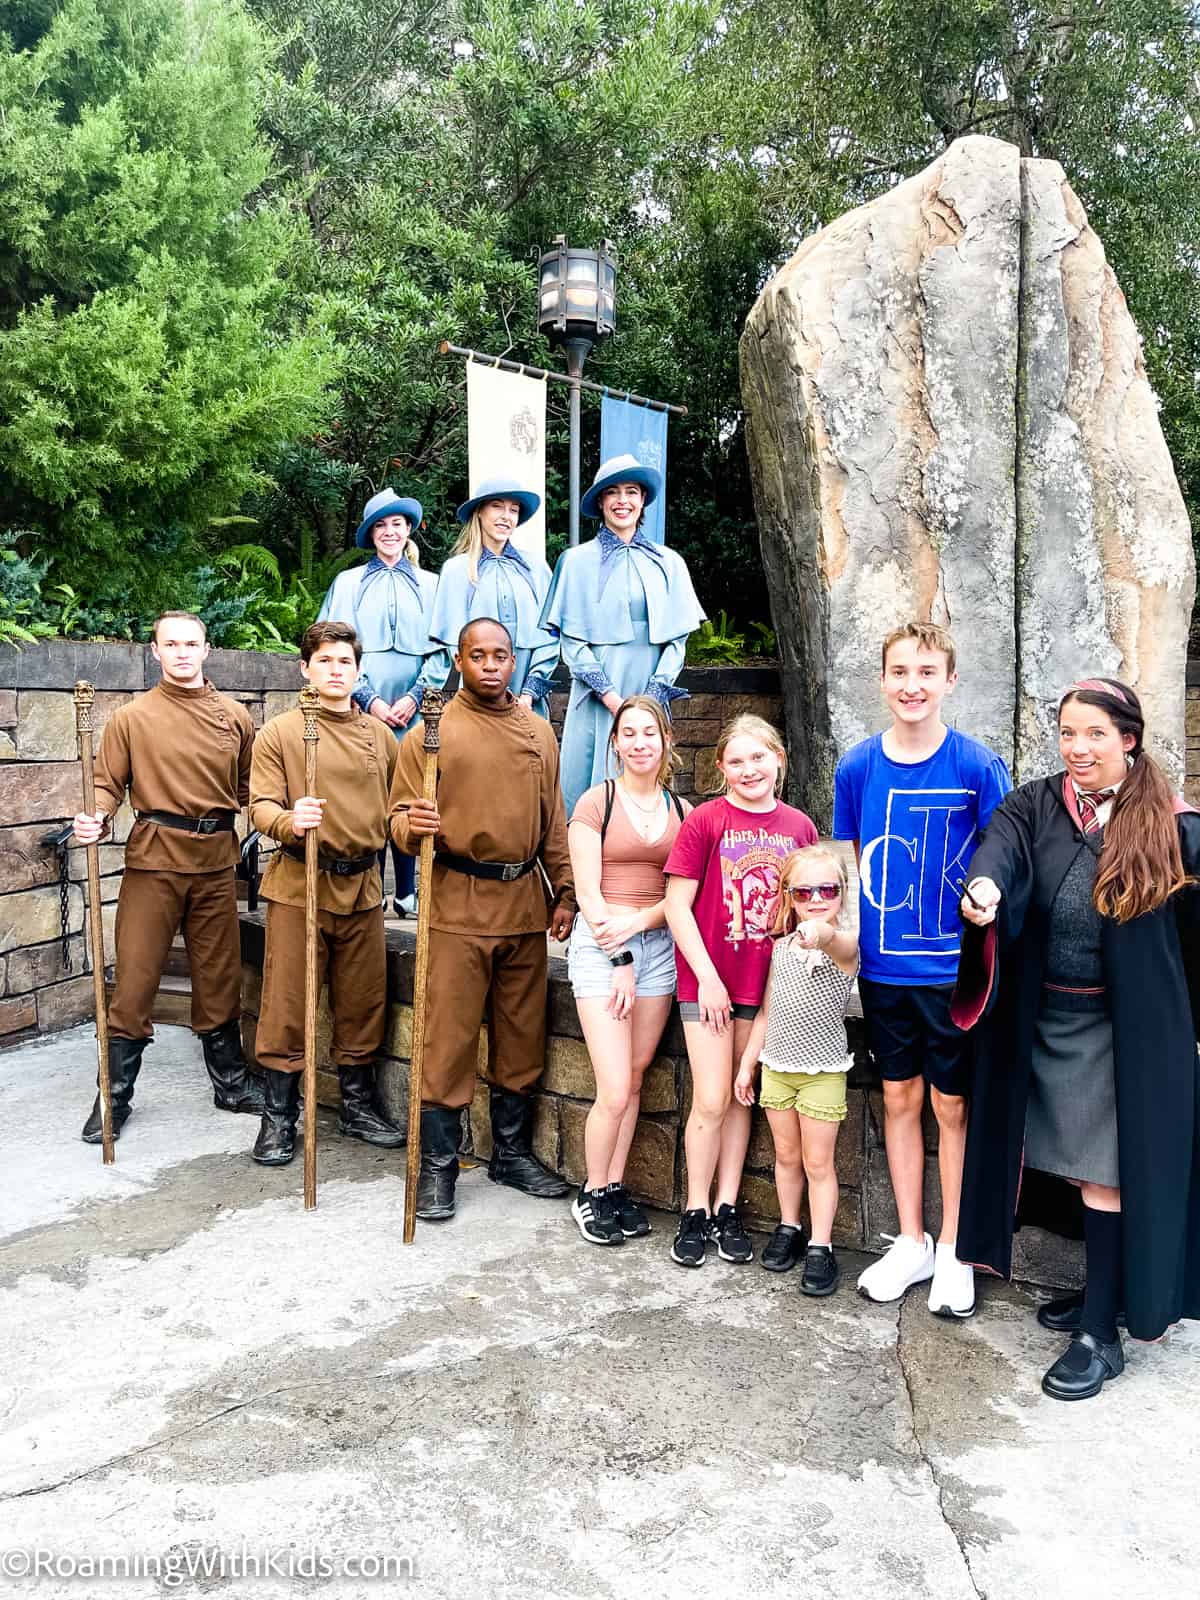 The Best Tips for Visiting Universal Orlando with Kids